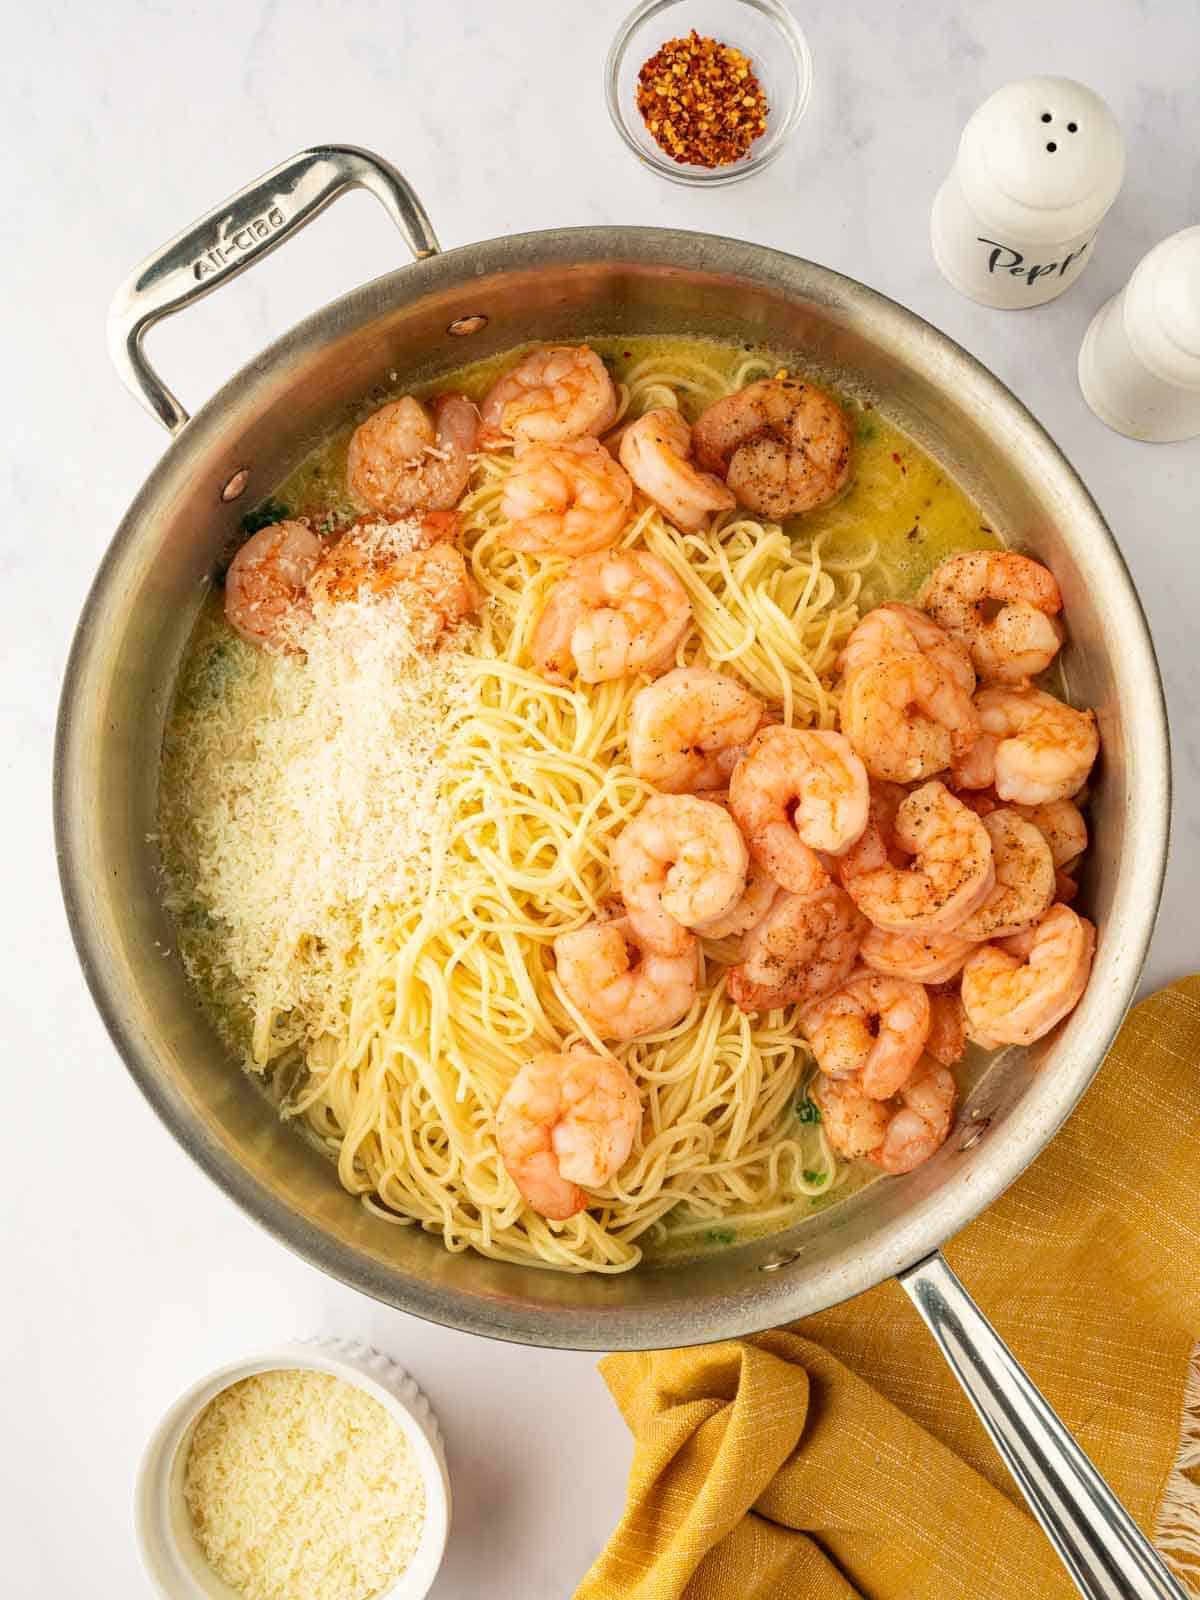 Process of mixing shrimp with pasta and cheese.